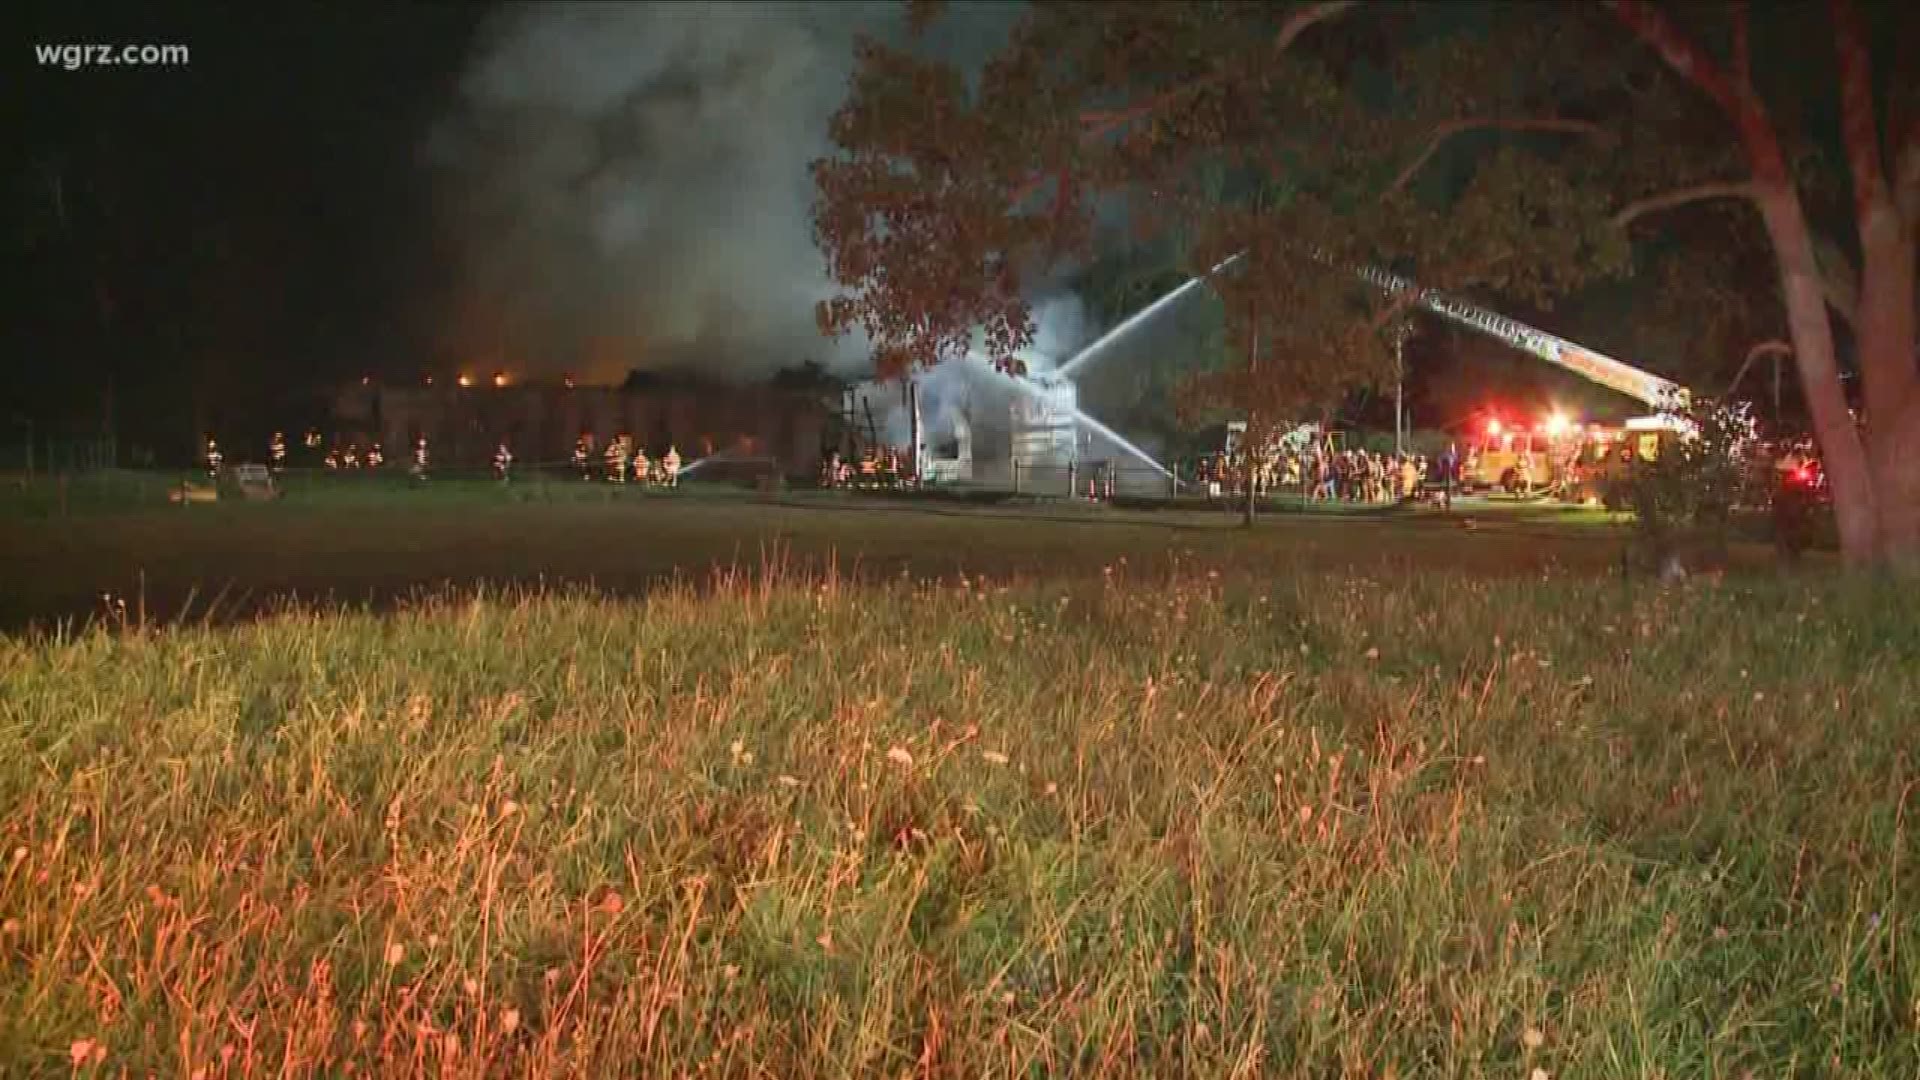 No people were reportedly hurt— the barn is considered a total loss.